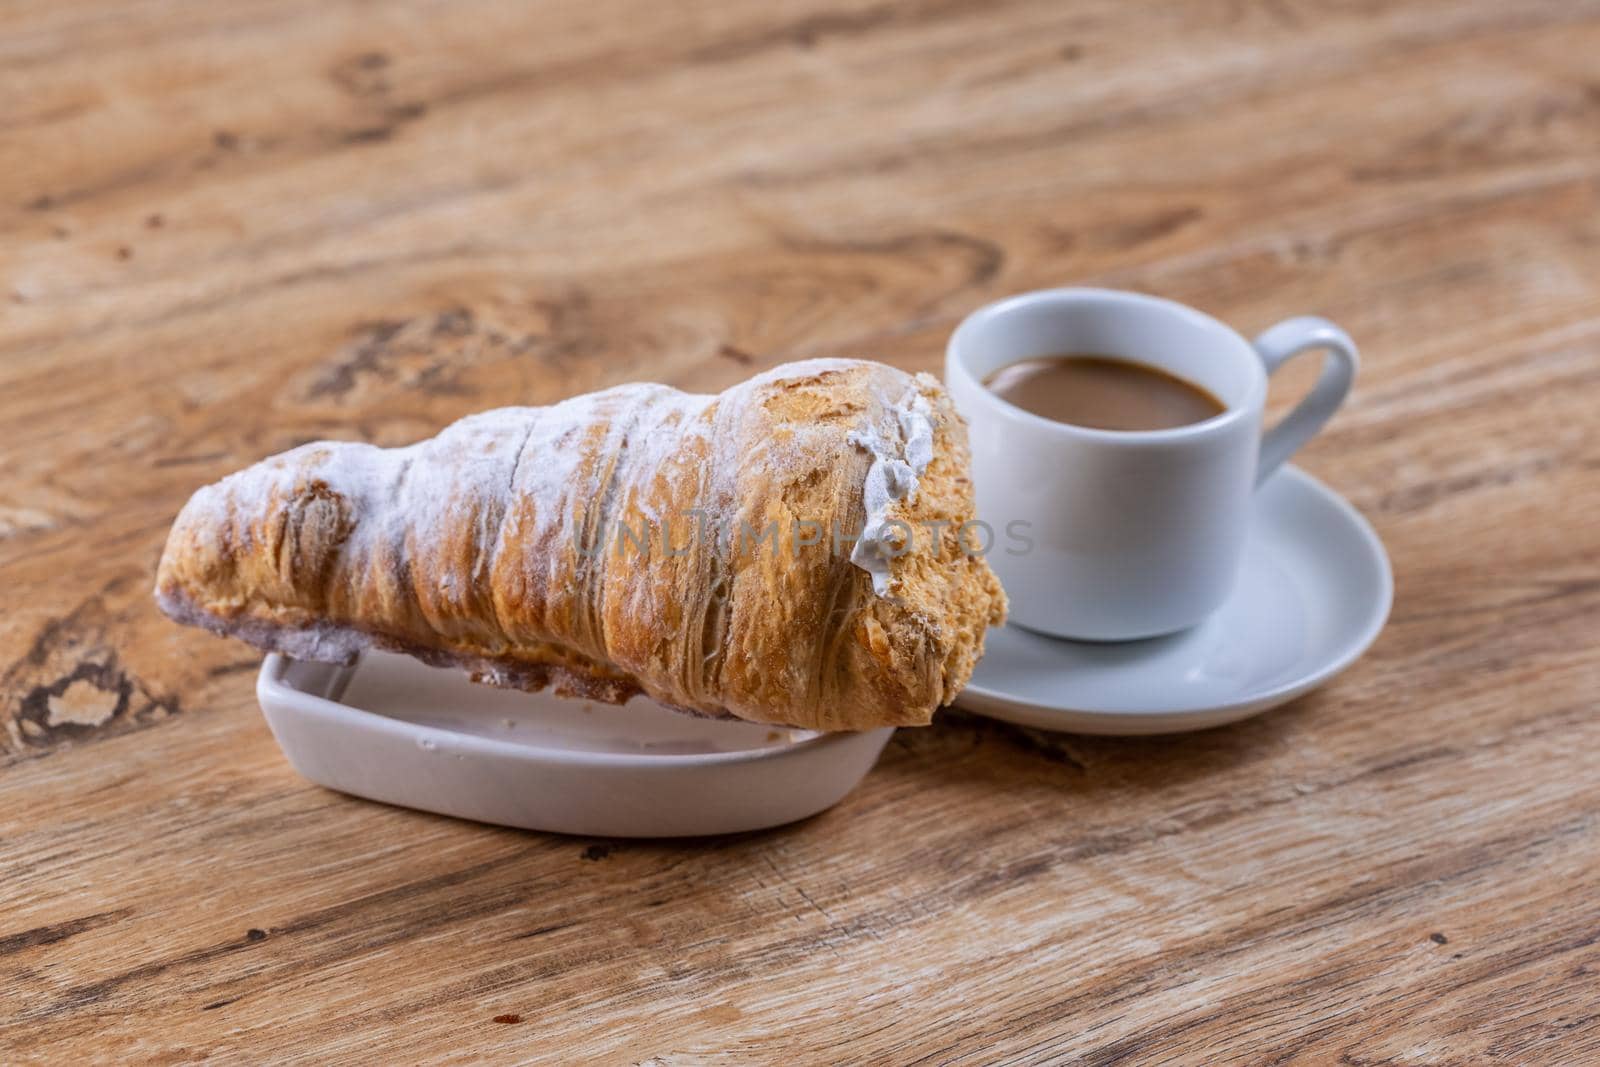  A cup of coffee next to delicious aromatic puff pastry cone with protein cream by galinasharapova